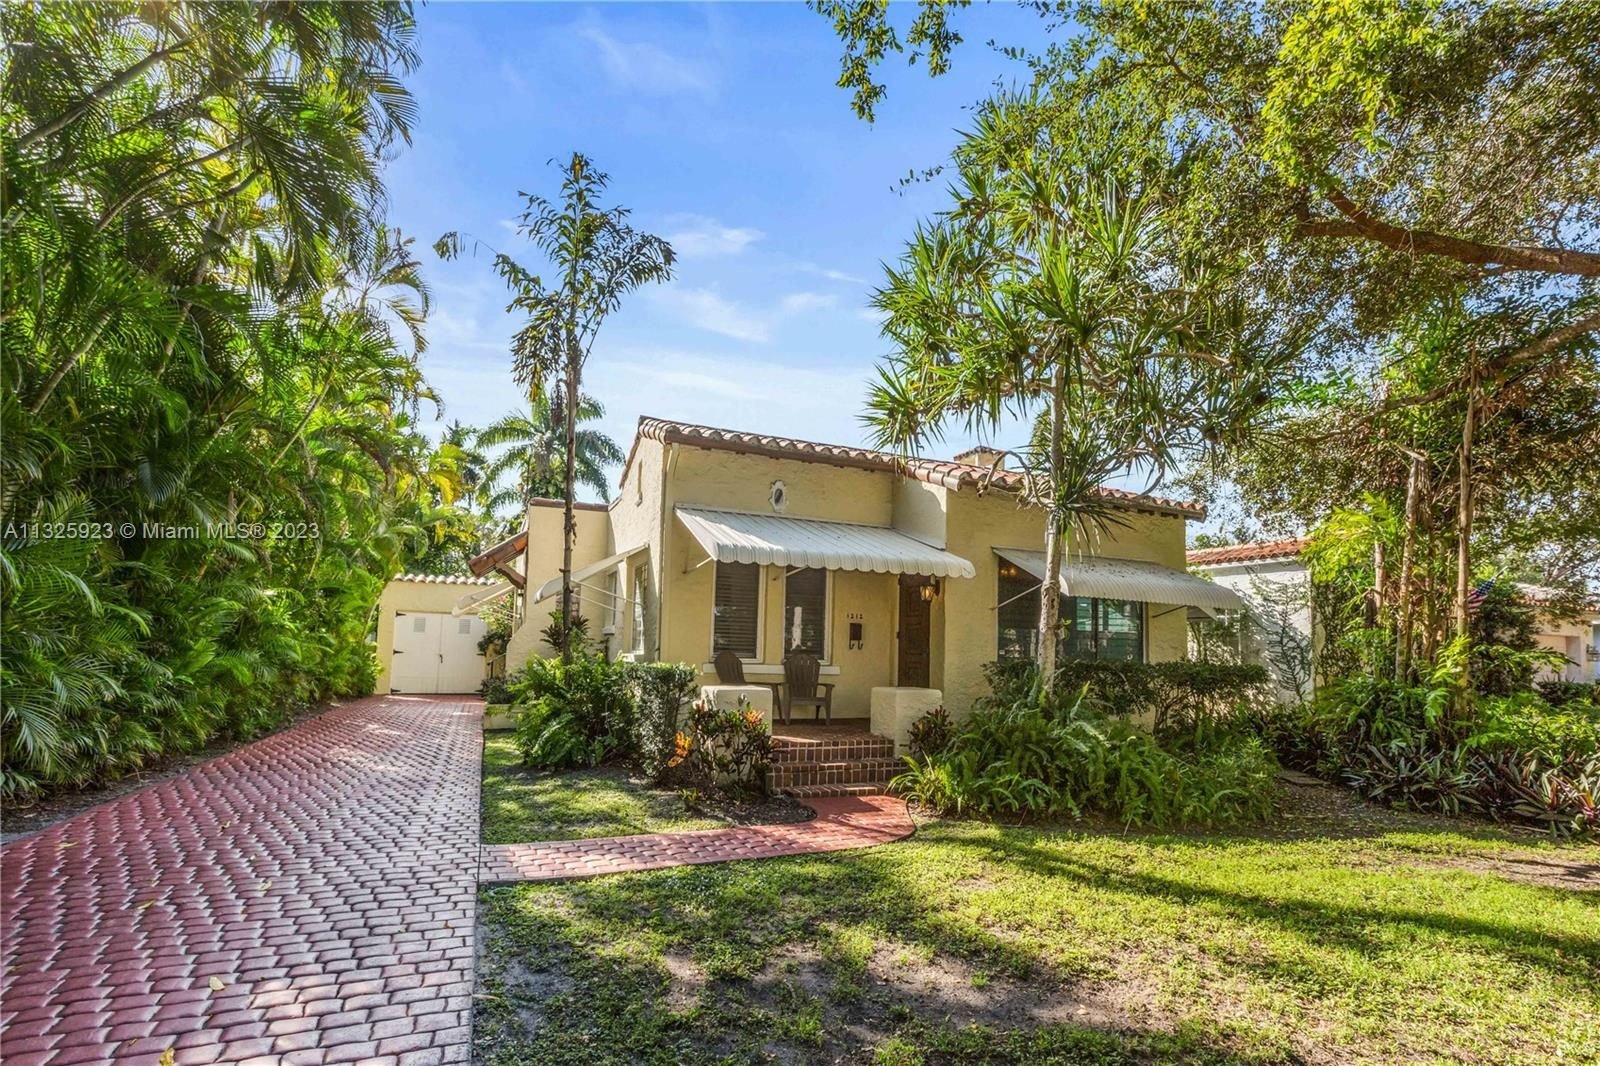 Real estate property located at 1212 Milan Ave, Miami-Dade County, Coral Gables, FL